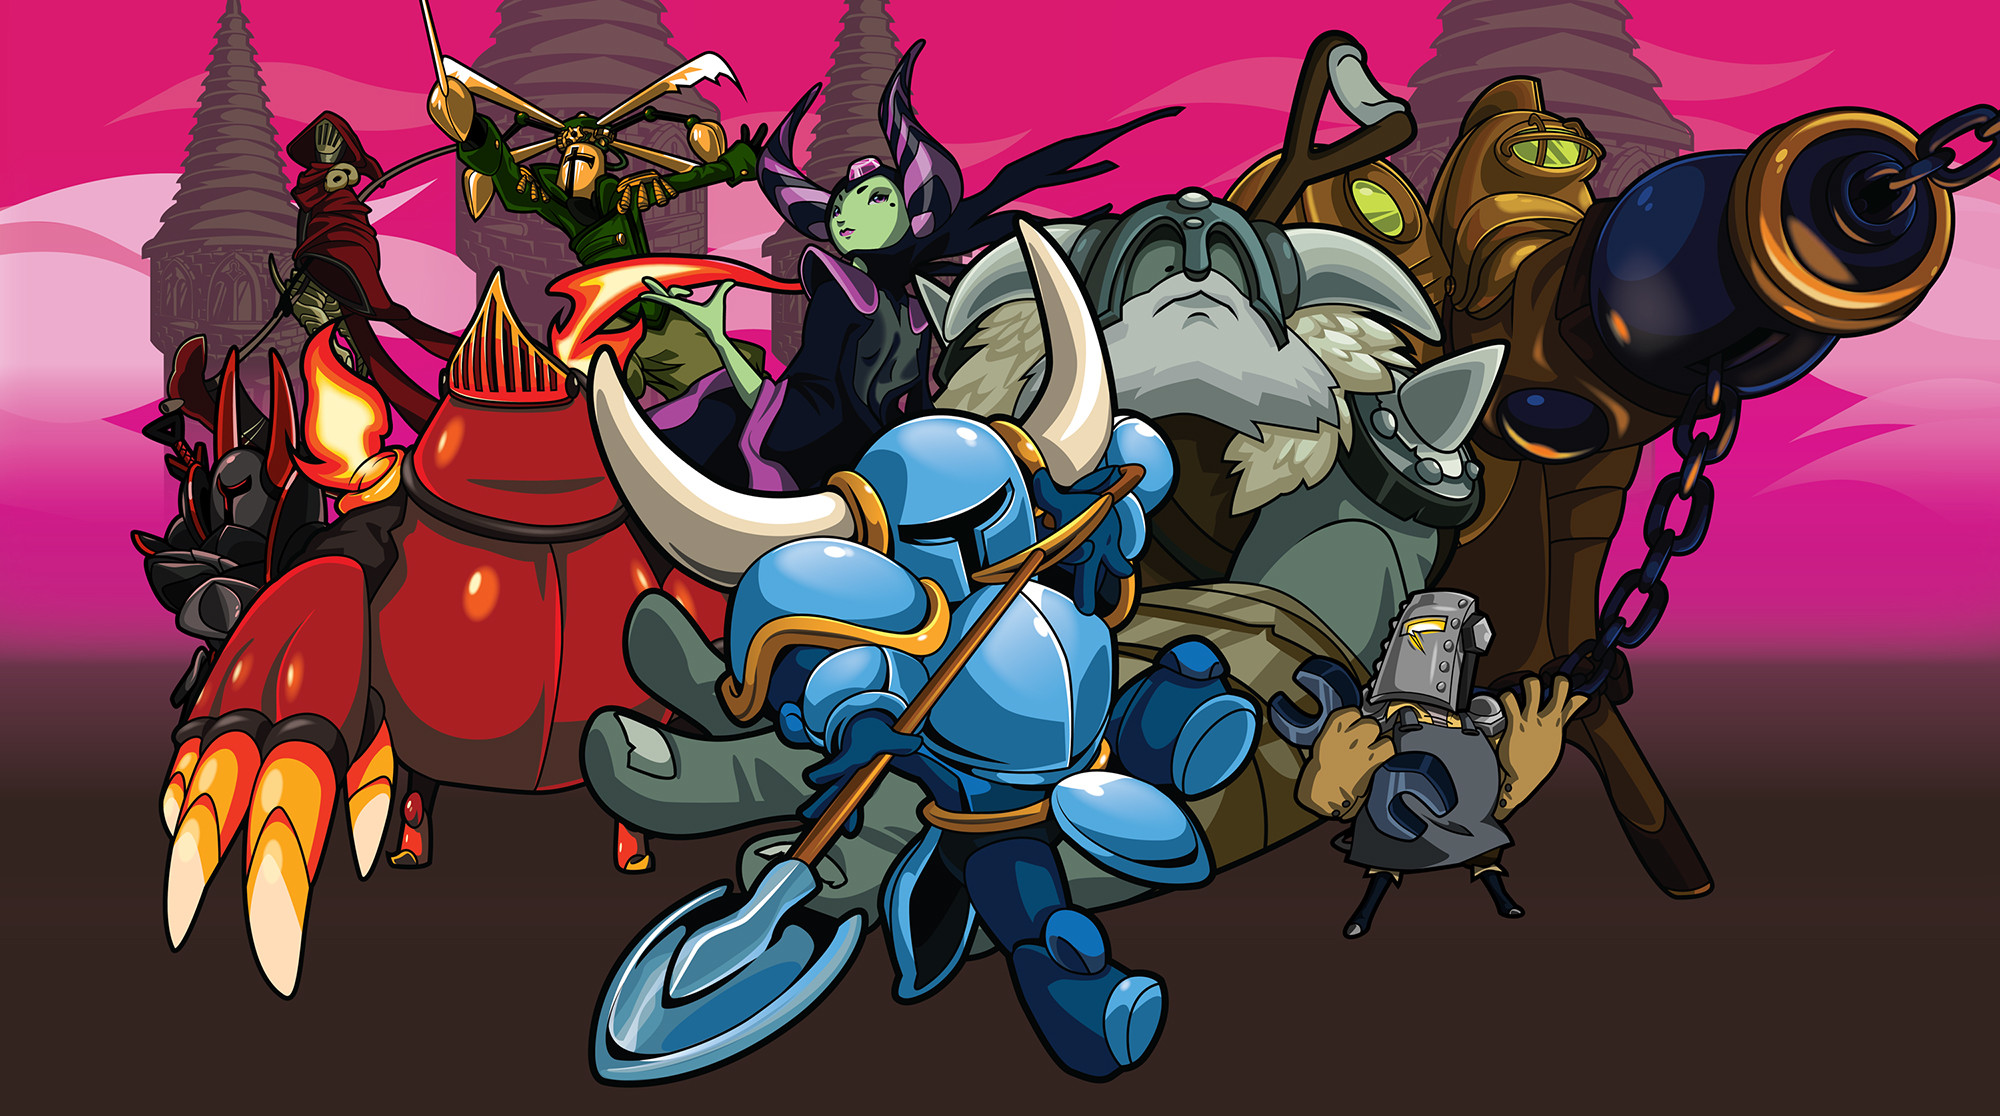 2000x1116 Shovel Knight's Nintendo Switch release will include big changes